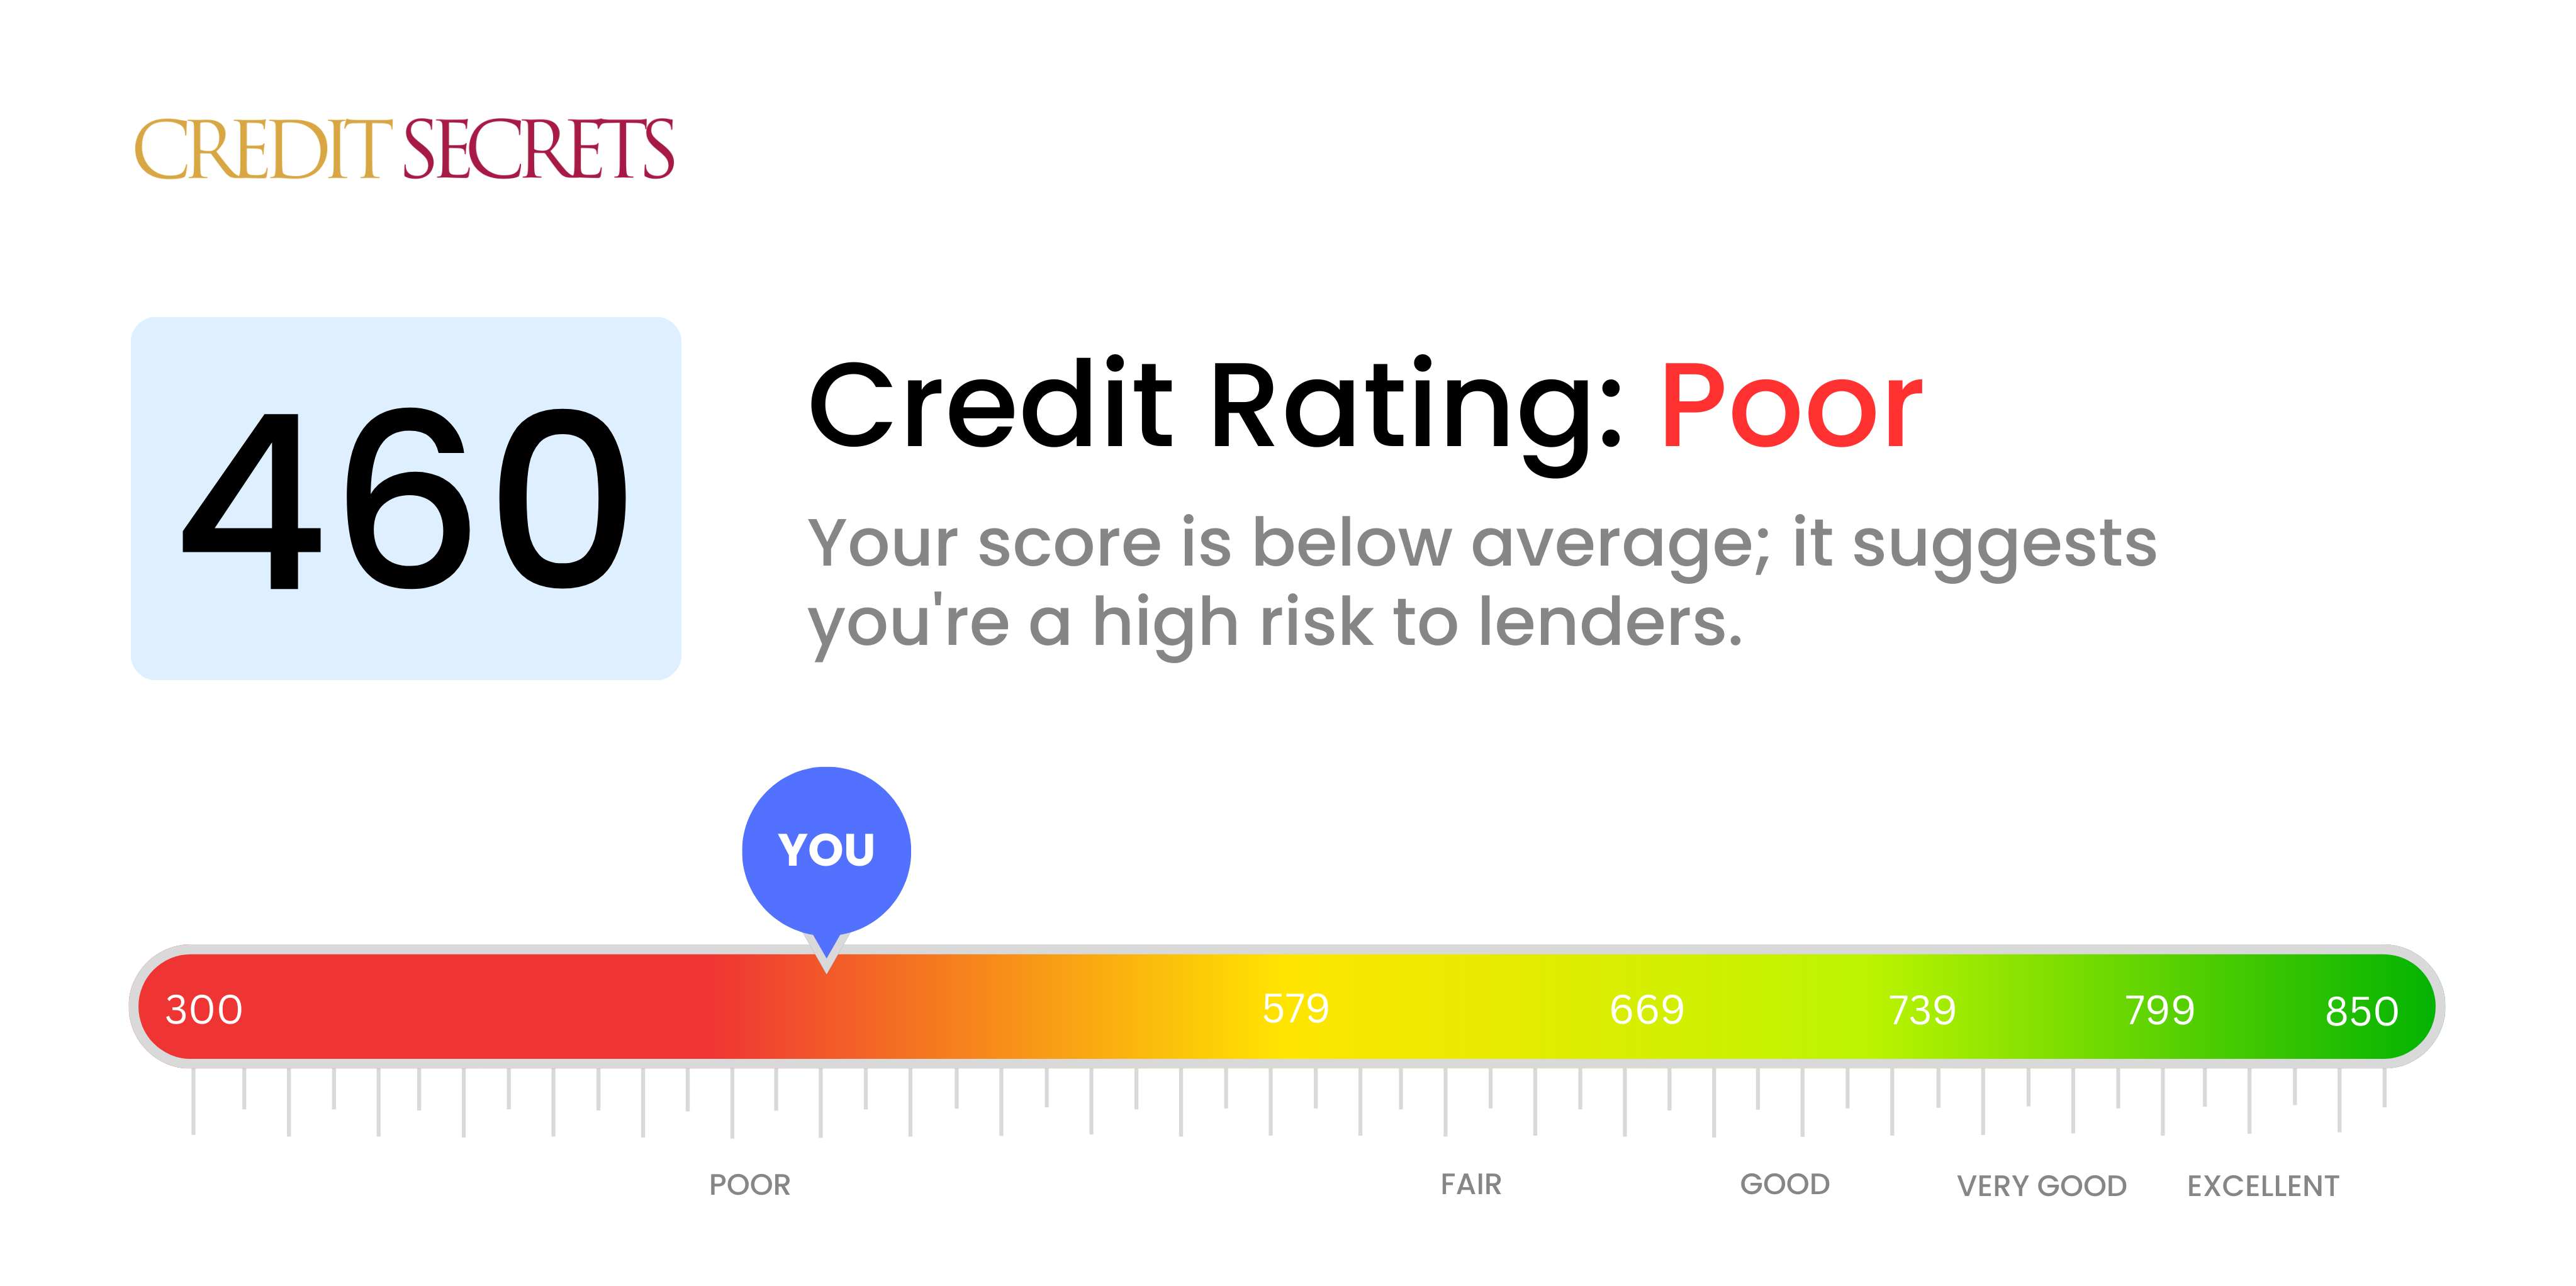 Is 460 a good credit score?